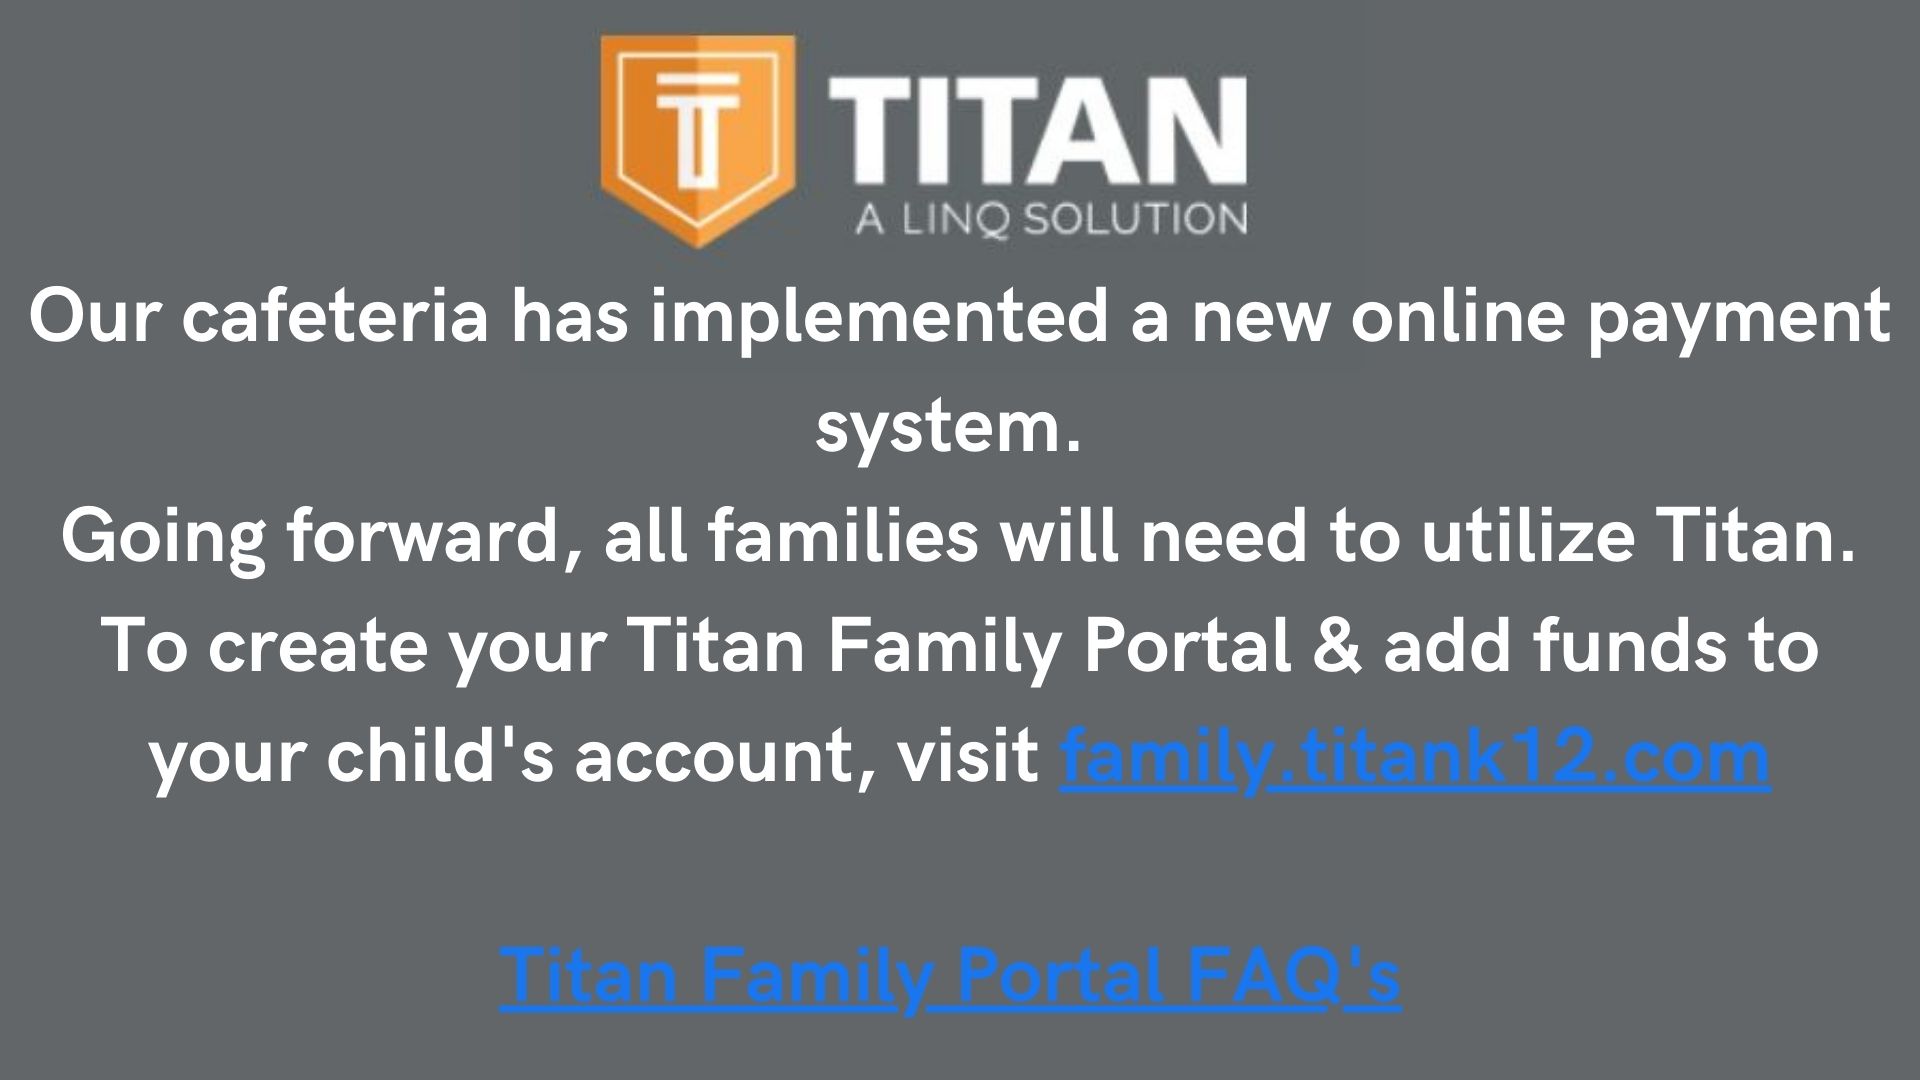 Our cafeteria has implemented a new online payment system. 
Going forward, all families will need to utilize Titan. To create your Titan Family Portal & add funds to your child's account, visit family.titank12.com